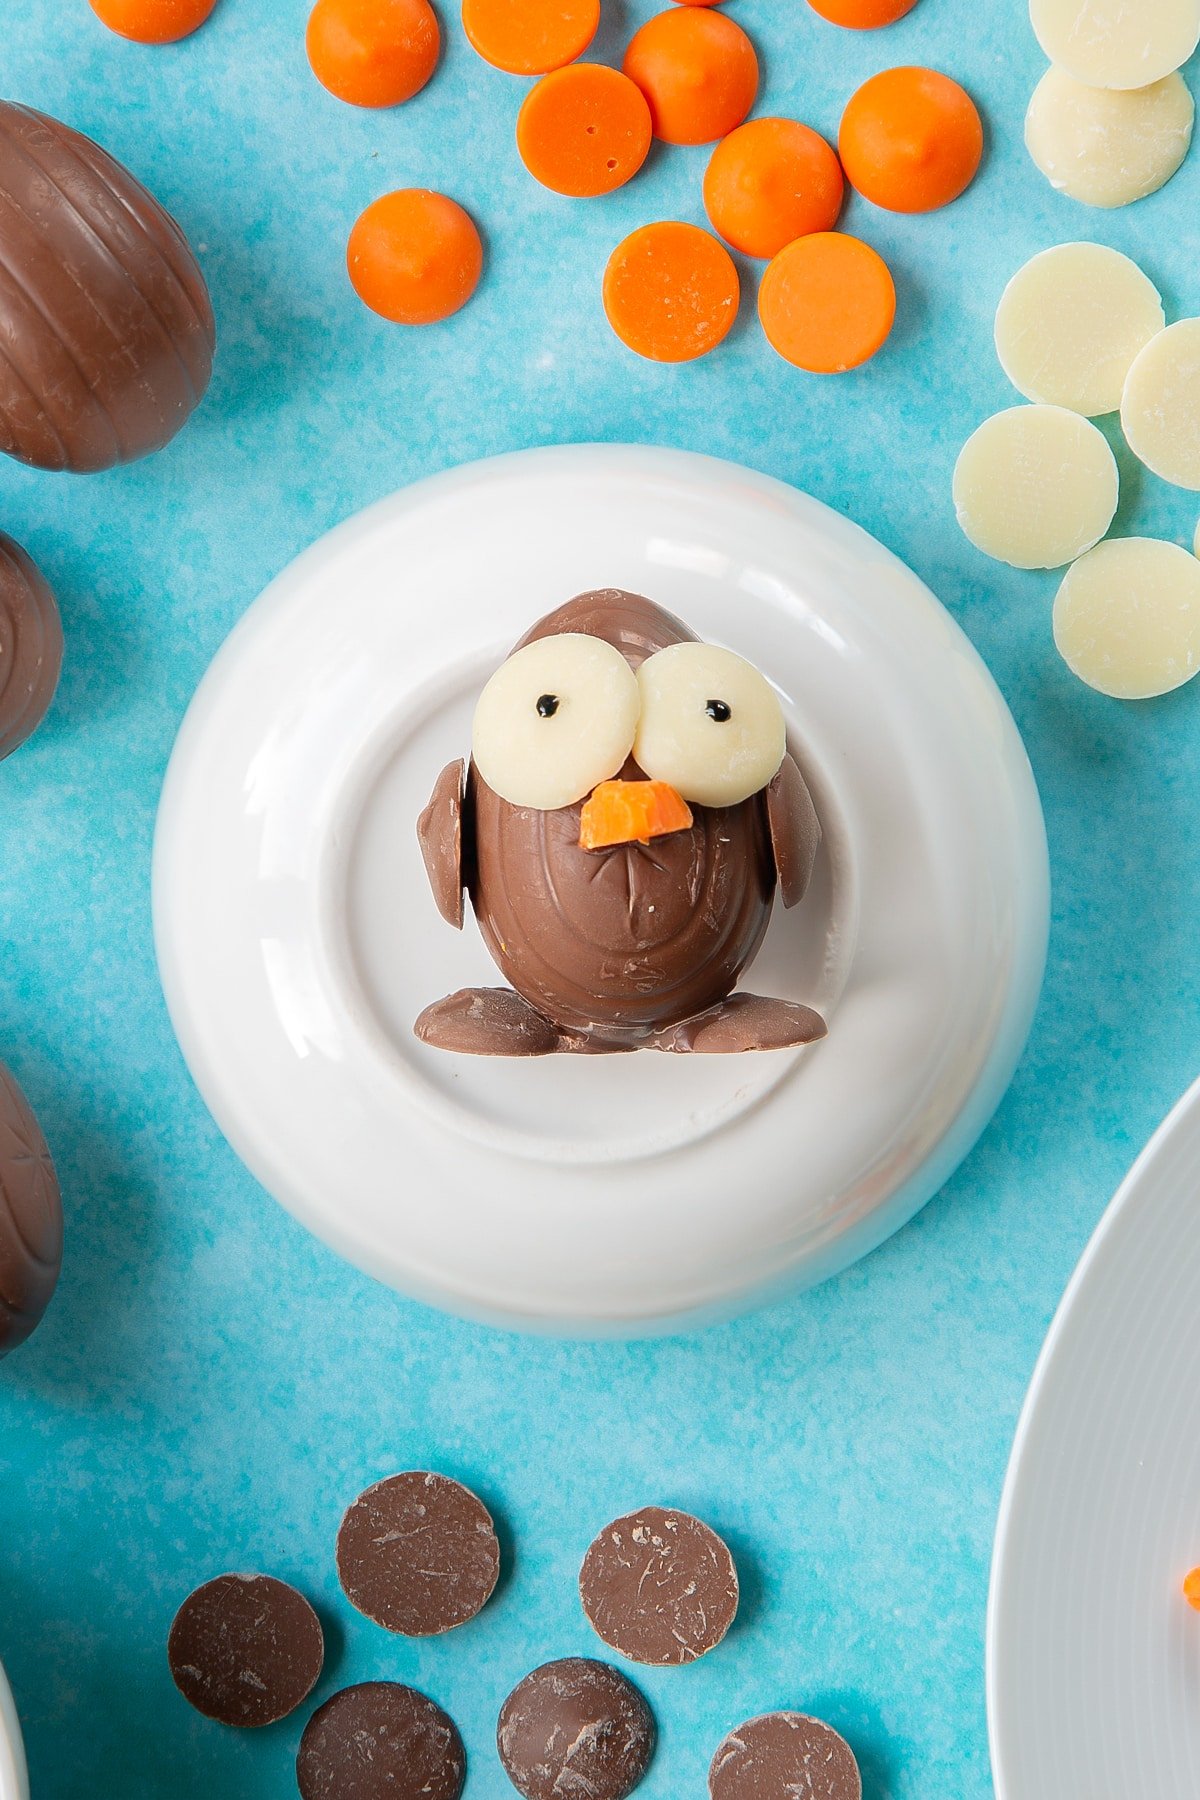 A creme egg is decorated with chocolate buttons to resemble an Easter chick. Pupils are drawn onto the eyes with black icing. The chick rests on a bowl, surrounded by ingredients to make chocolate chicks.